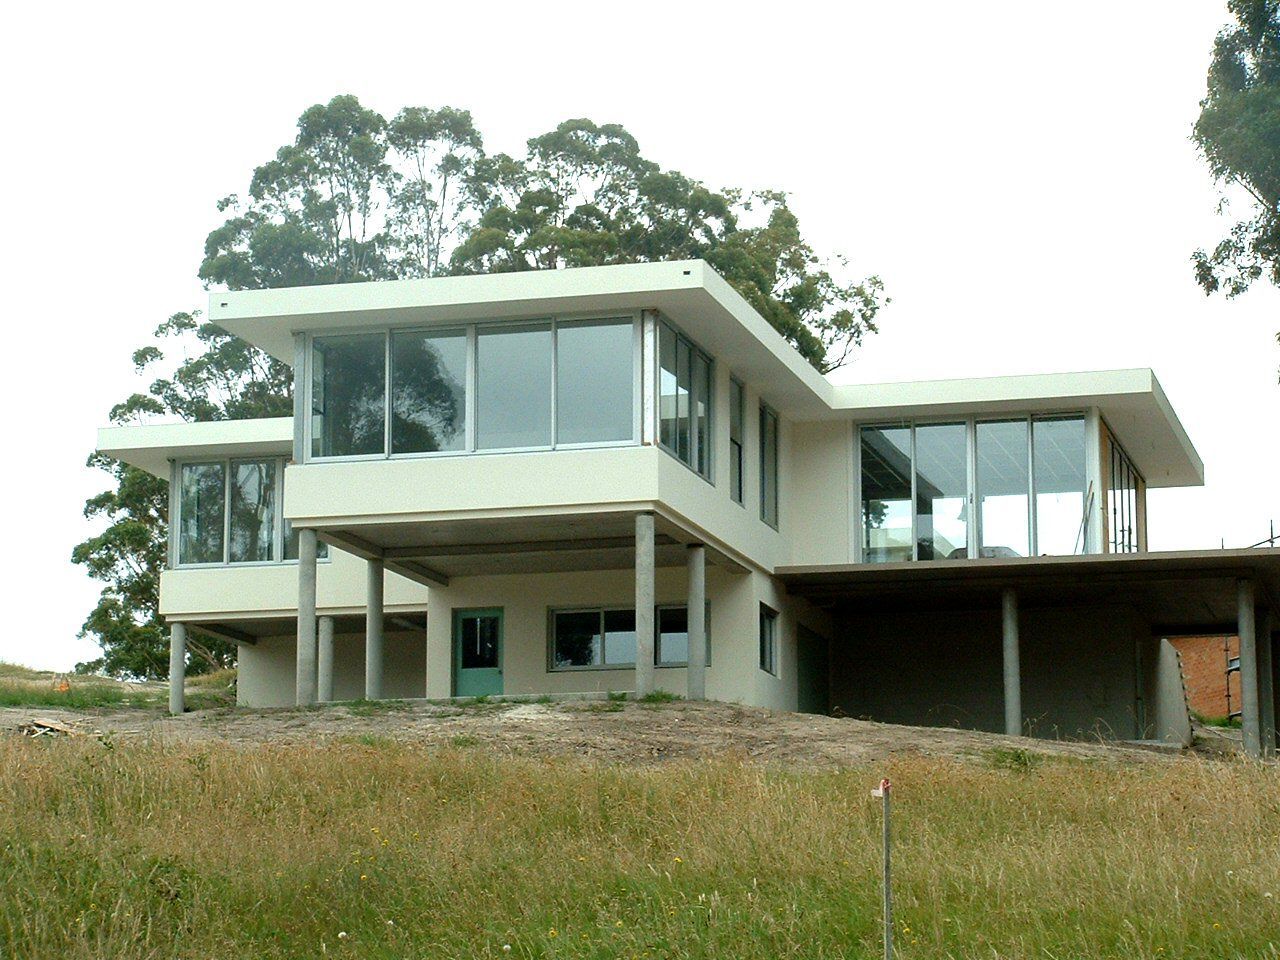 White house— Previous Projects in South Nowra, NSW